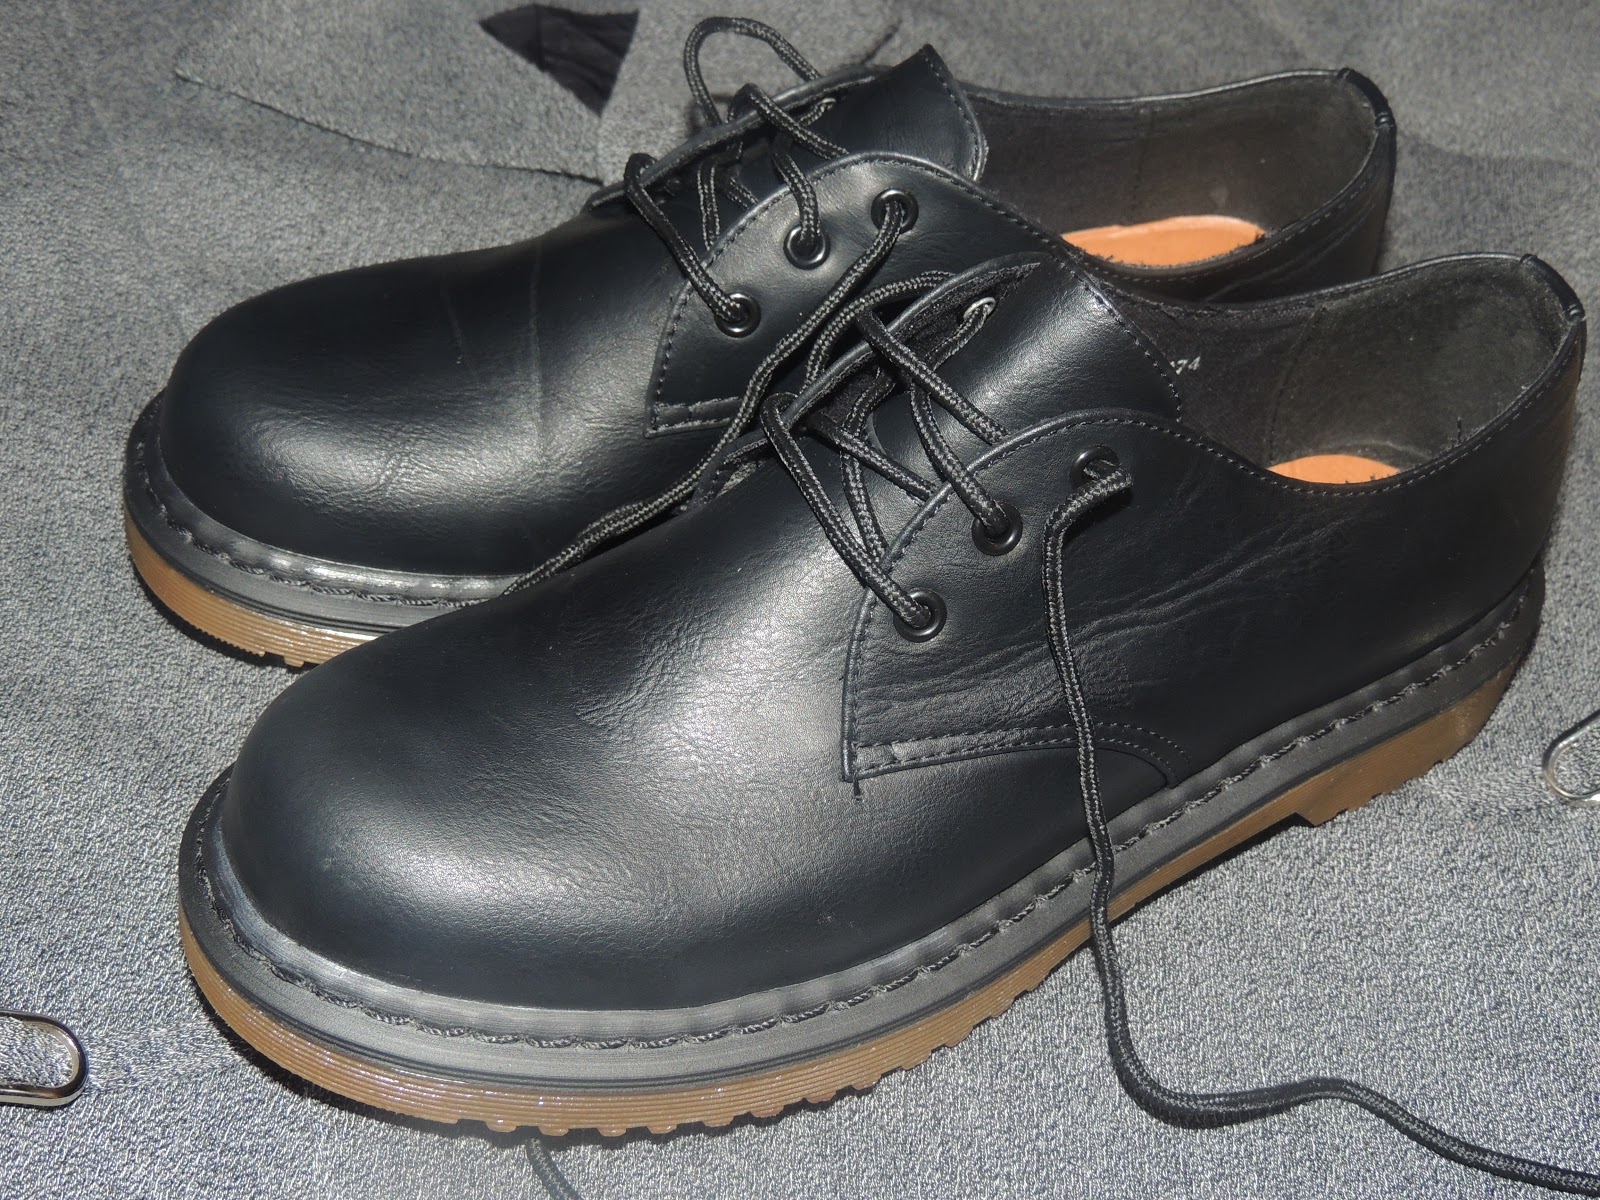 AUTHENTIC DUPLICATE.: Recent Purchase: Dr Martens 1461 Dupes